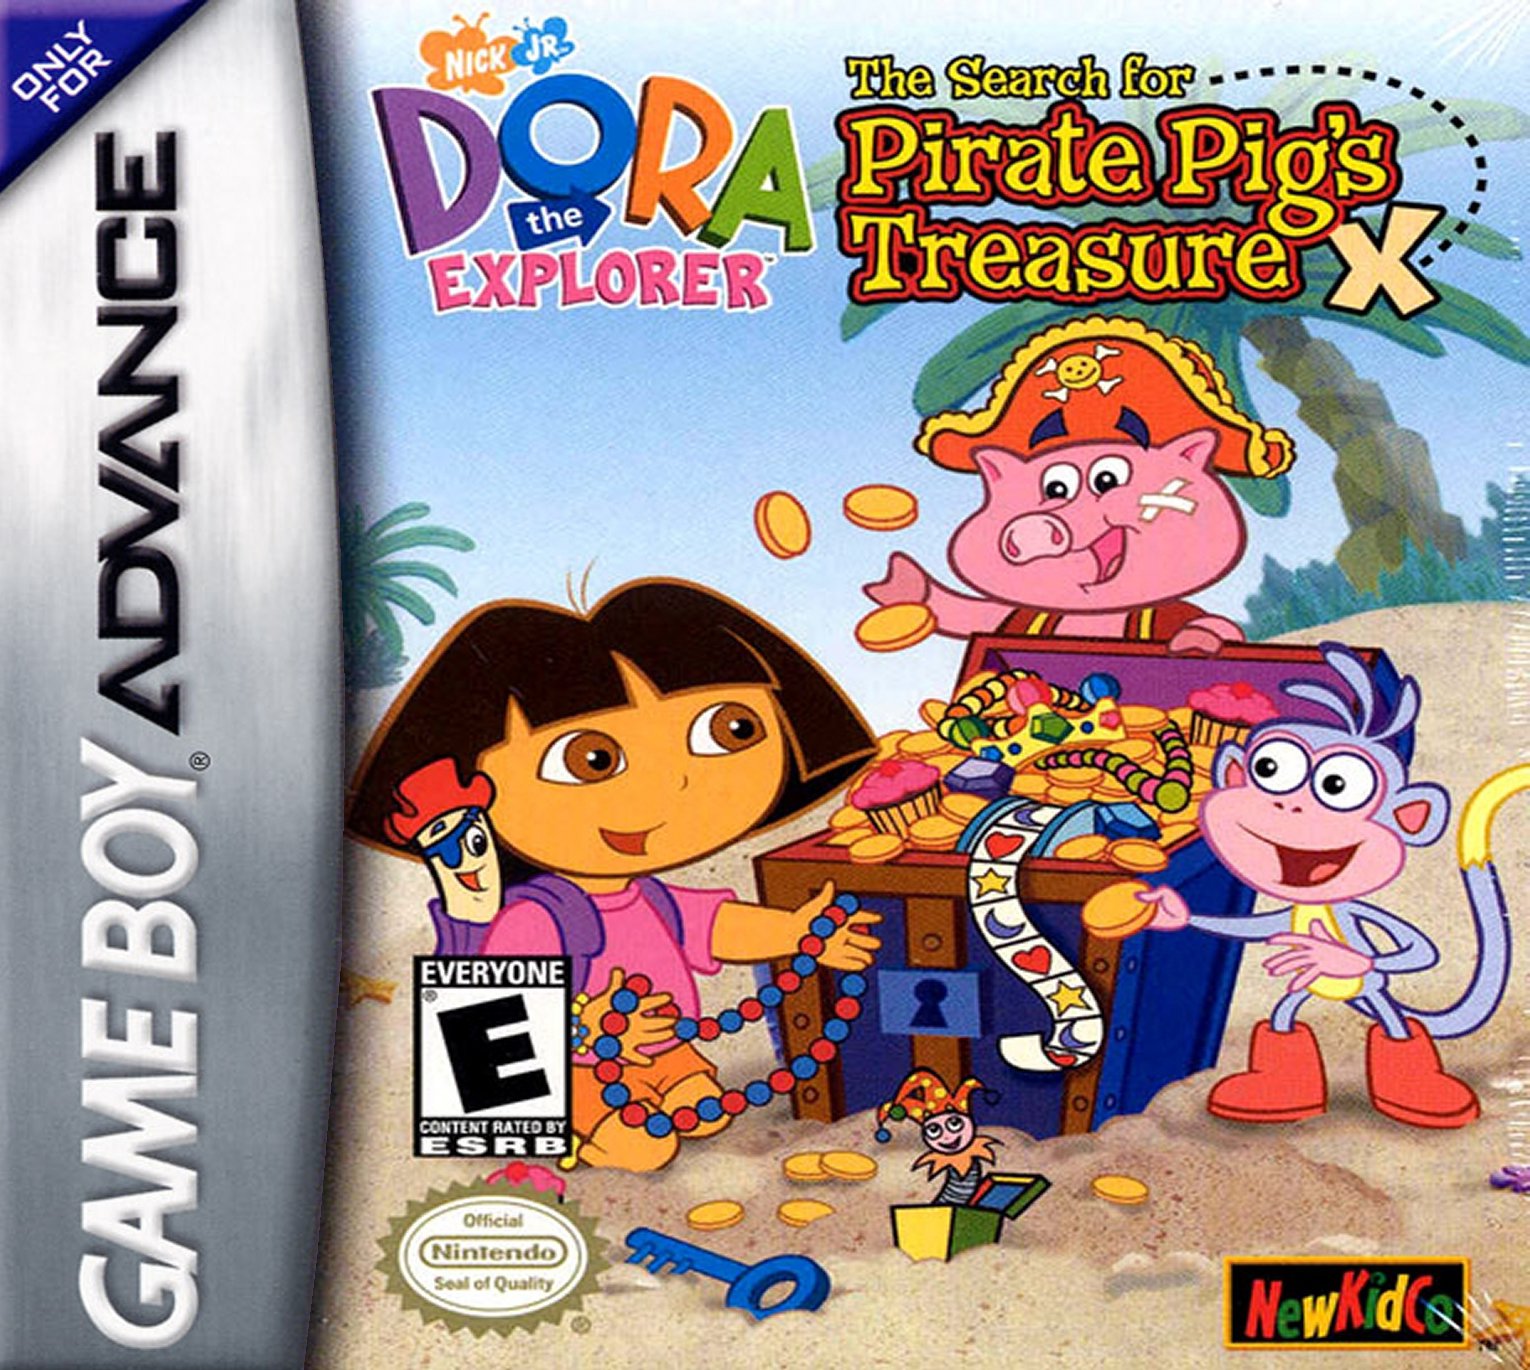 Image of Dora the Explorer: The Search for Pirate Pig's Treasure